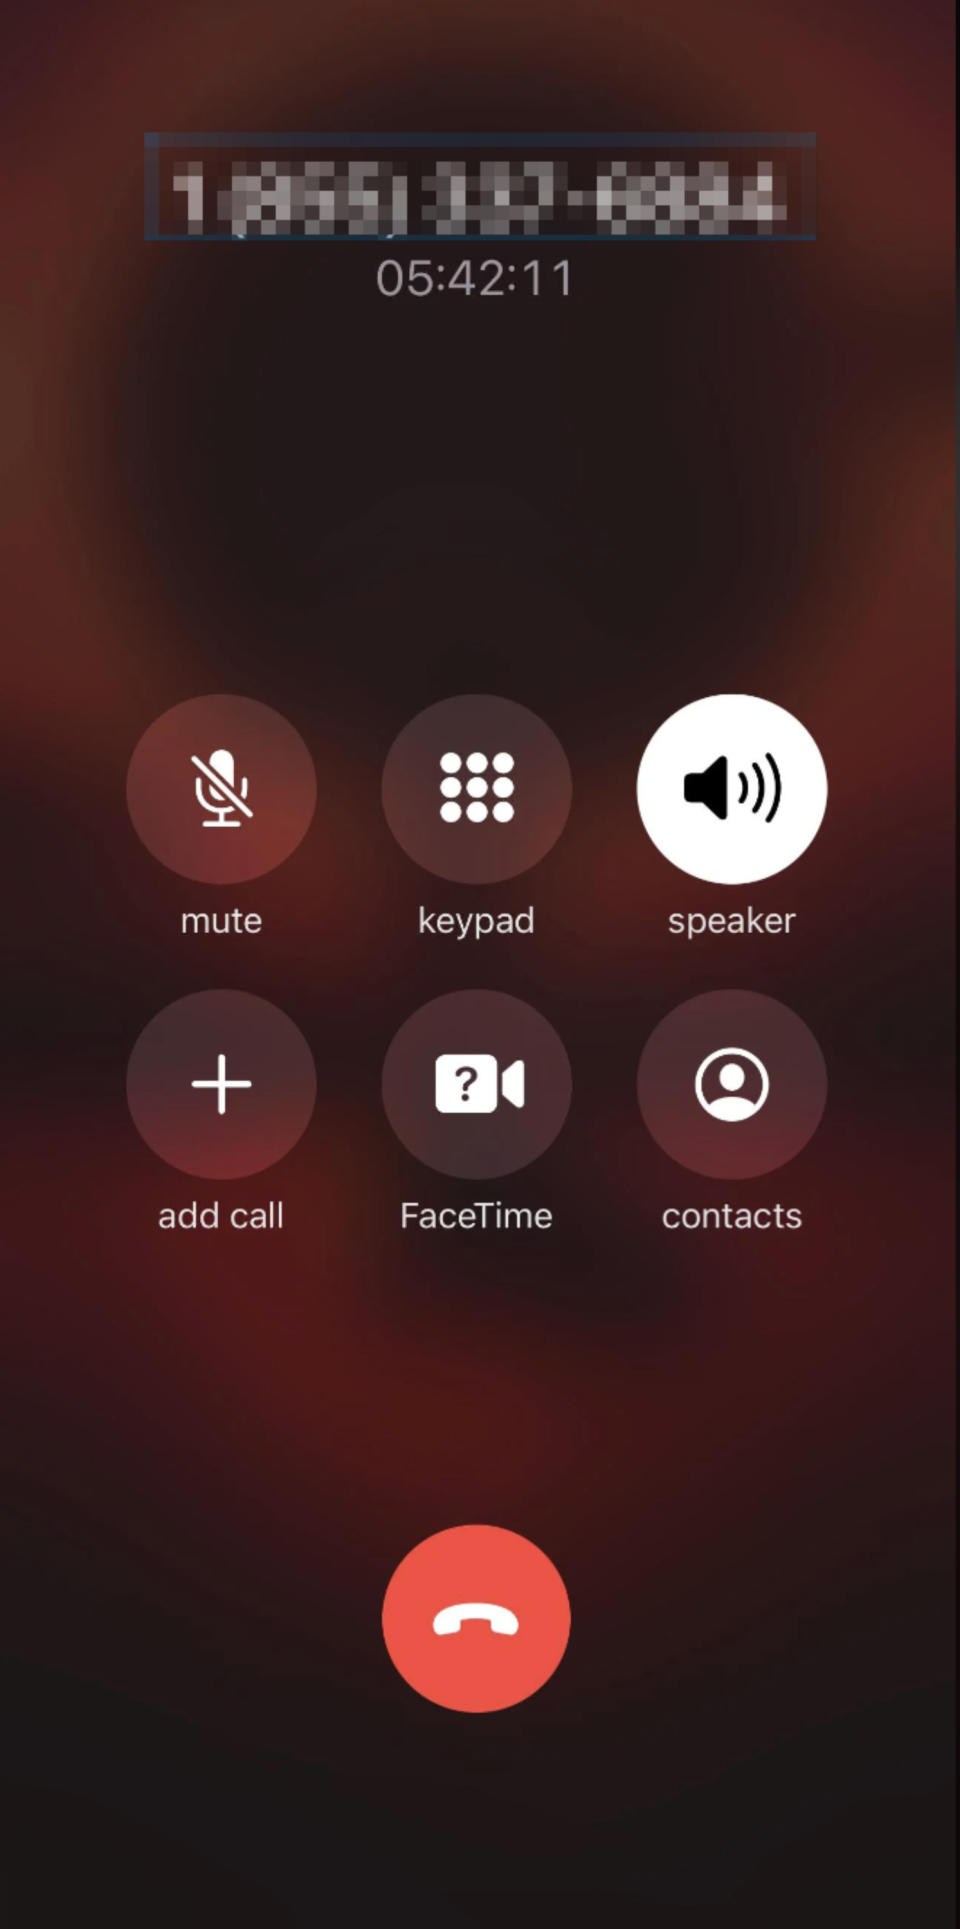 Phone screen showing an active call with 1 (855) 337-6884, ongoing for 5 minutes and 42 seconds. Options displayed: mute, keypad, speaker, add call, FaceTime, contacts, and end call